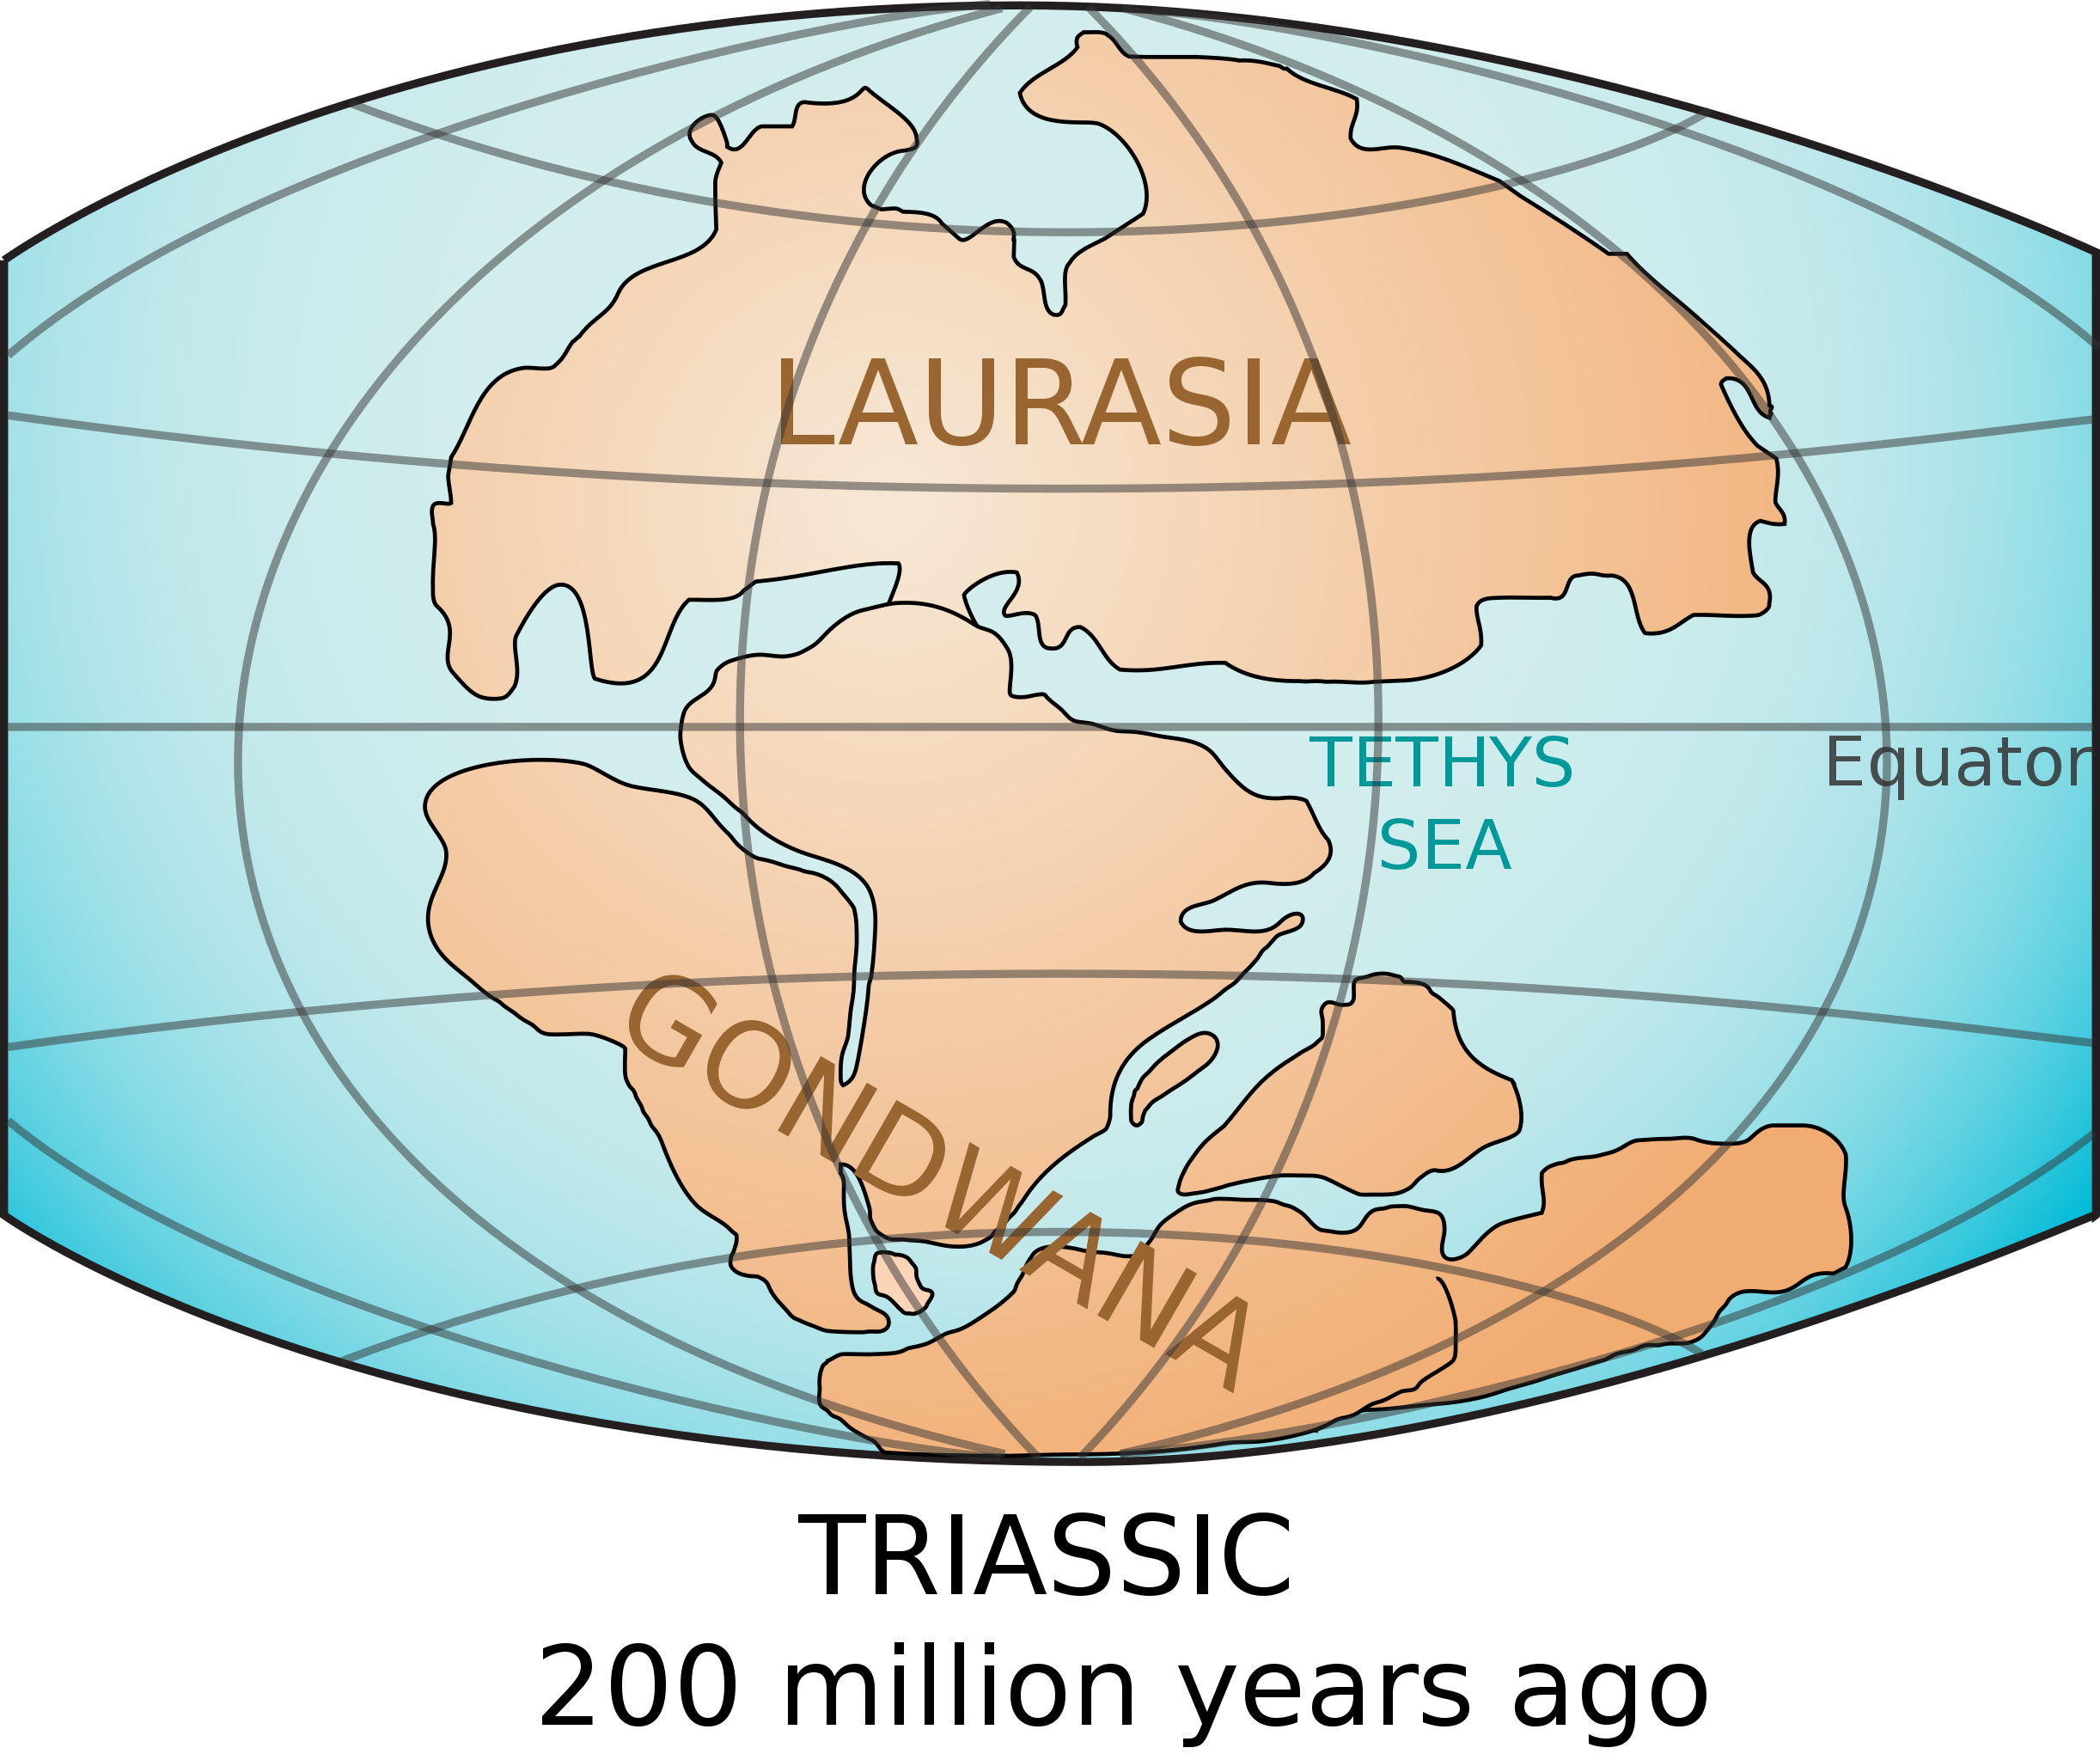 The continents Laurasia and Gondwana